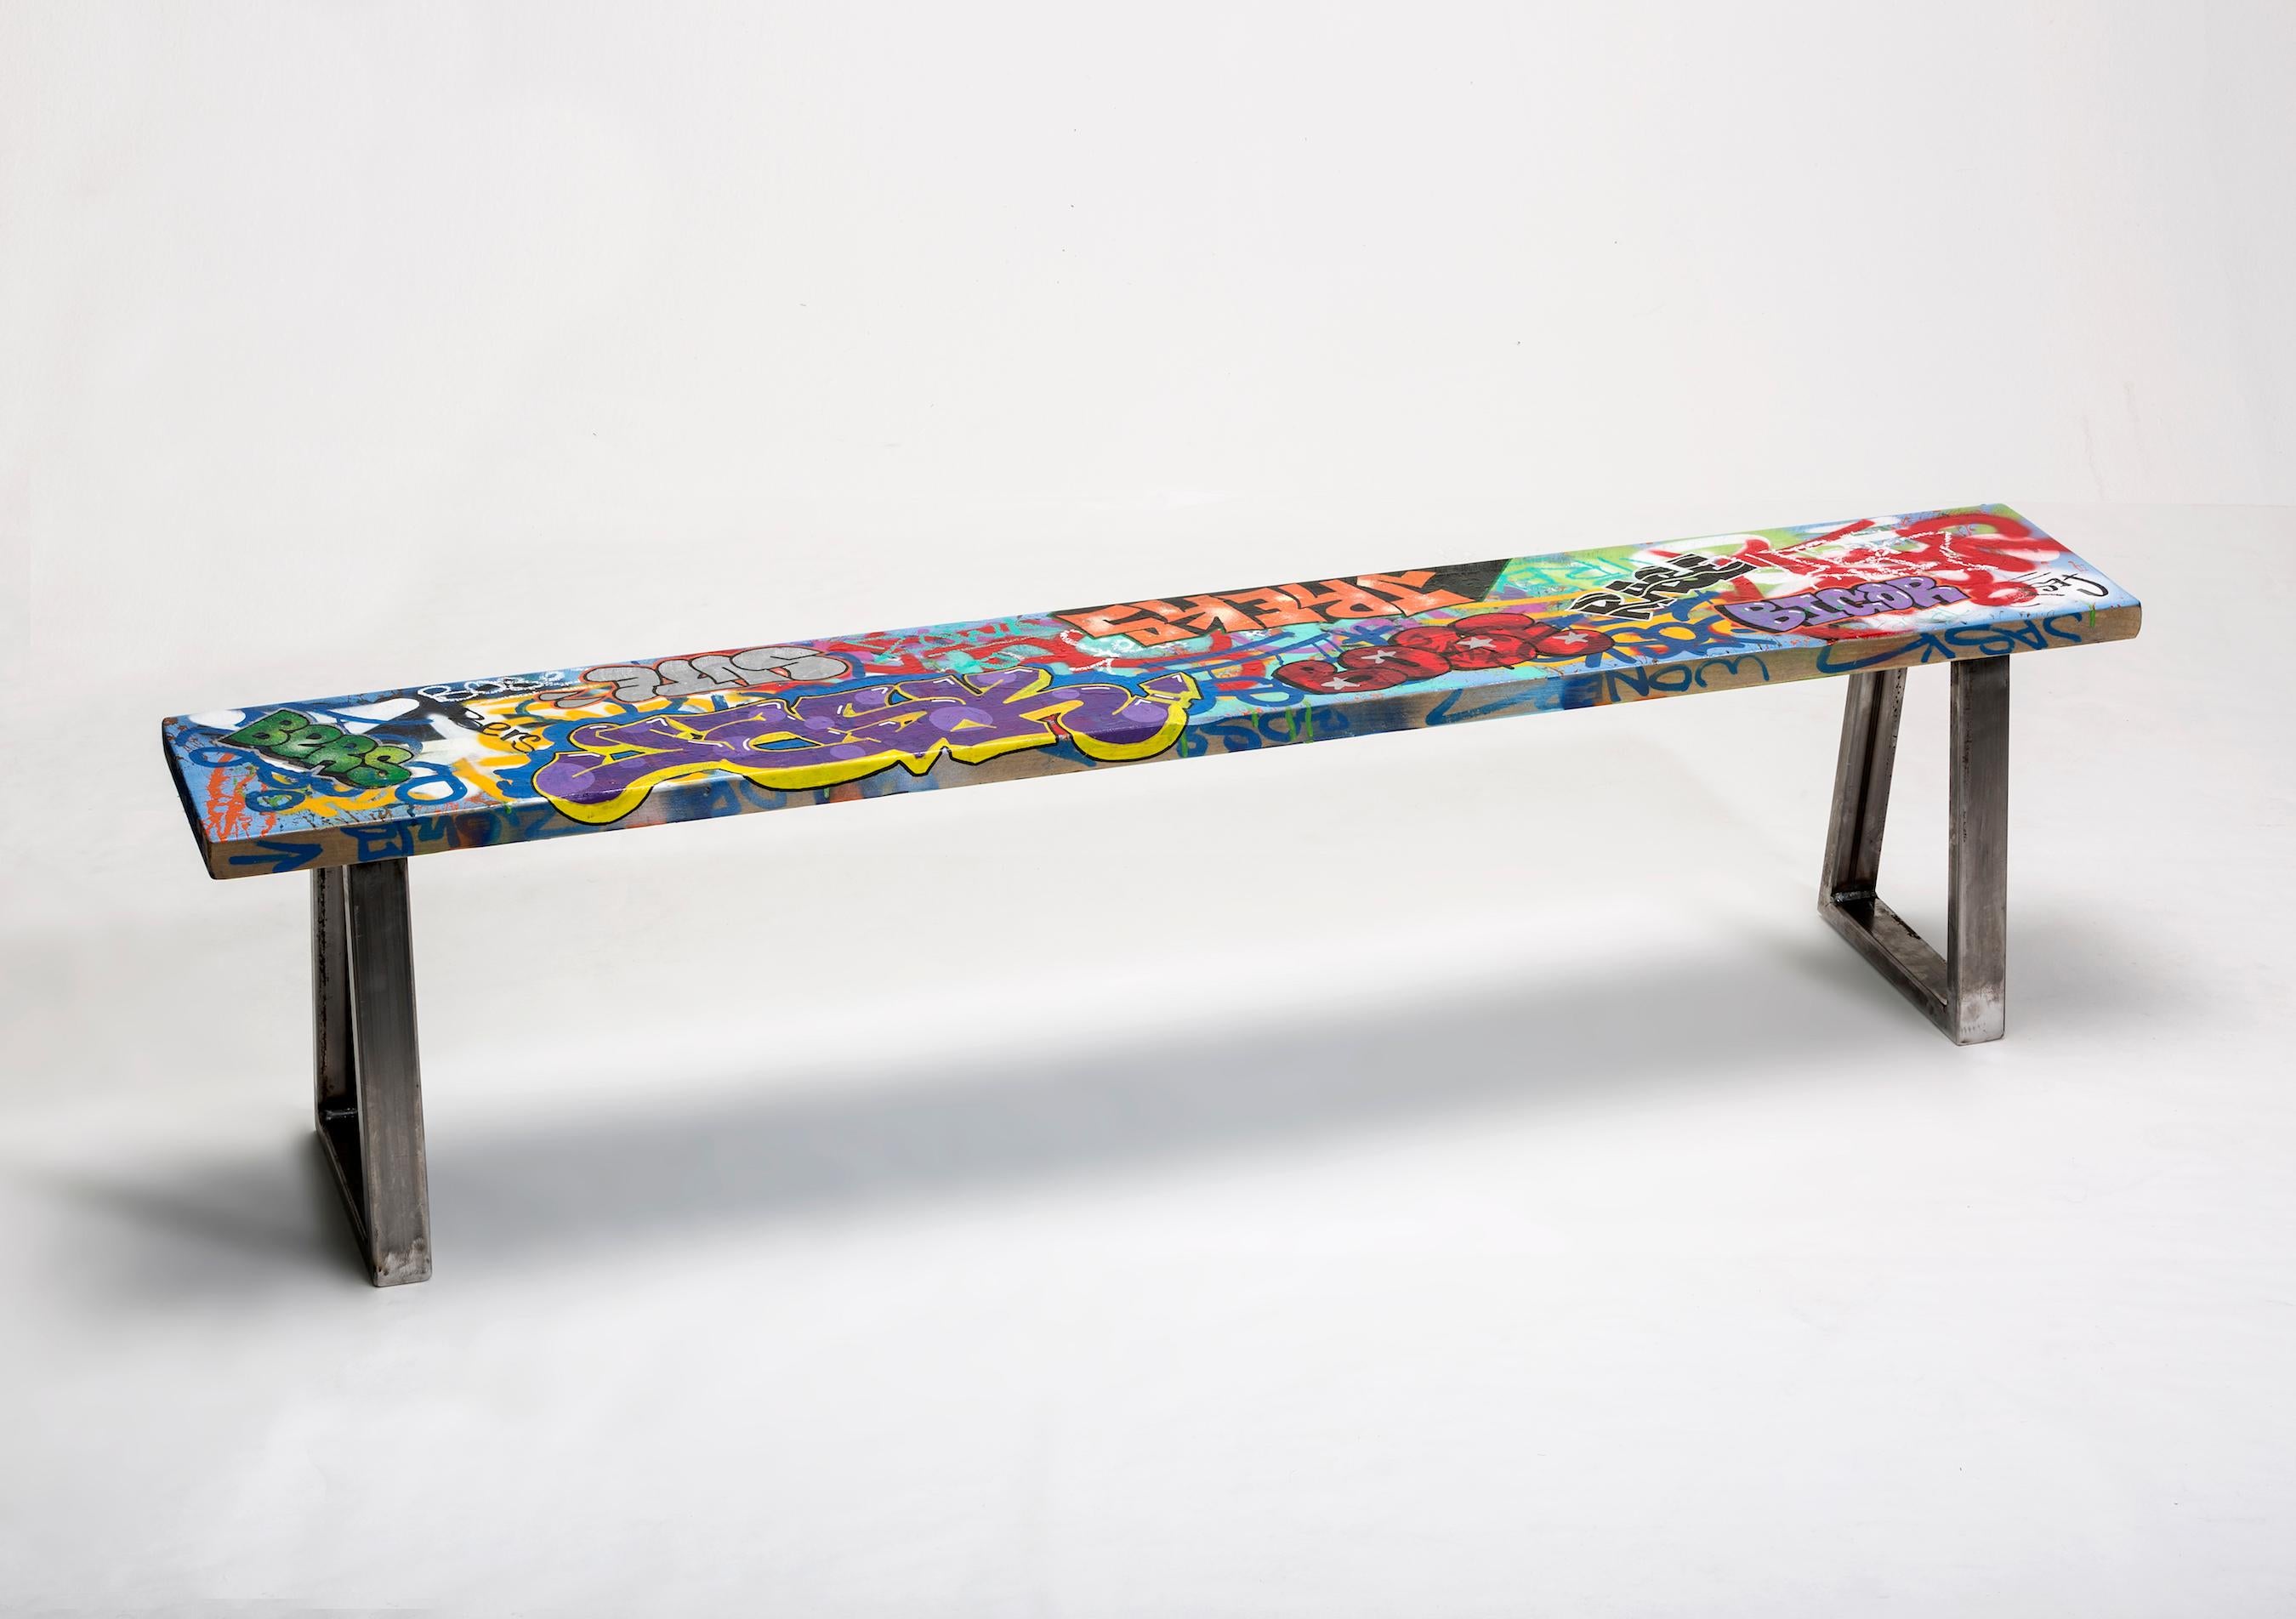 Unknown Abstract Sculpture - "Rase Alley" Large Colorful Graffiti Tagged Wood Bench